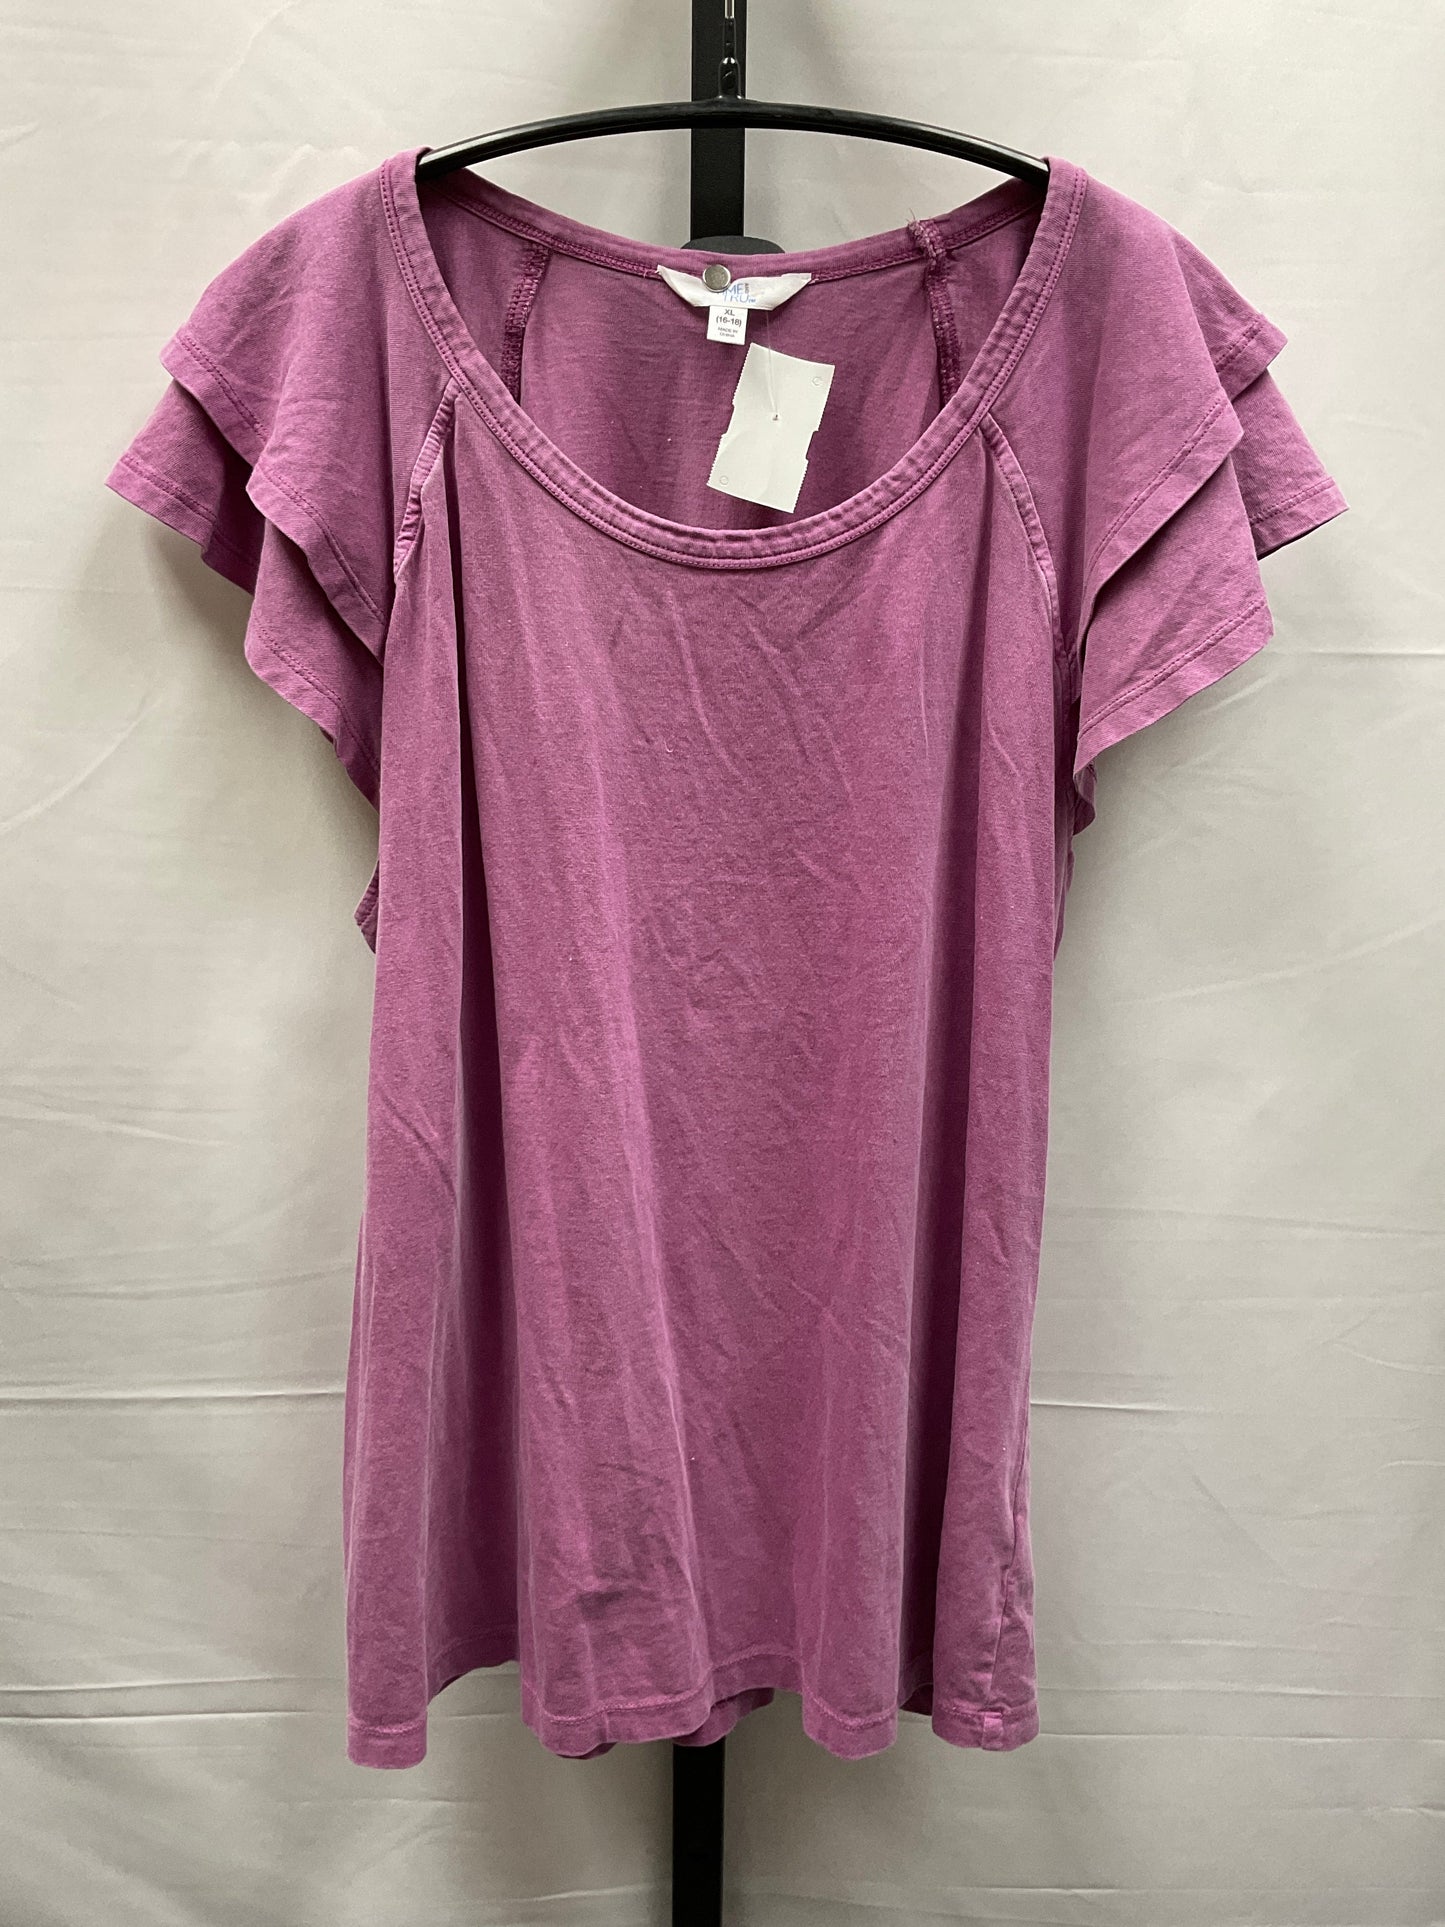 Purple Top Short Sleeve Time And Tru, Size Xl